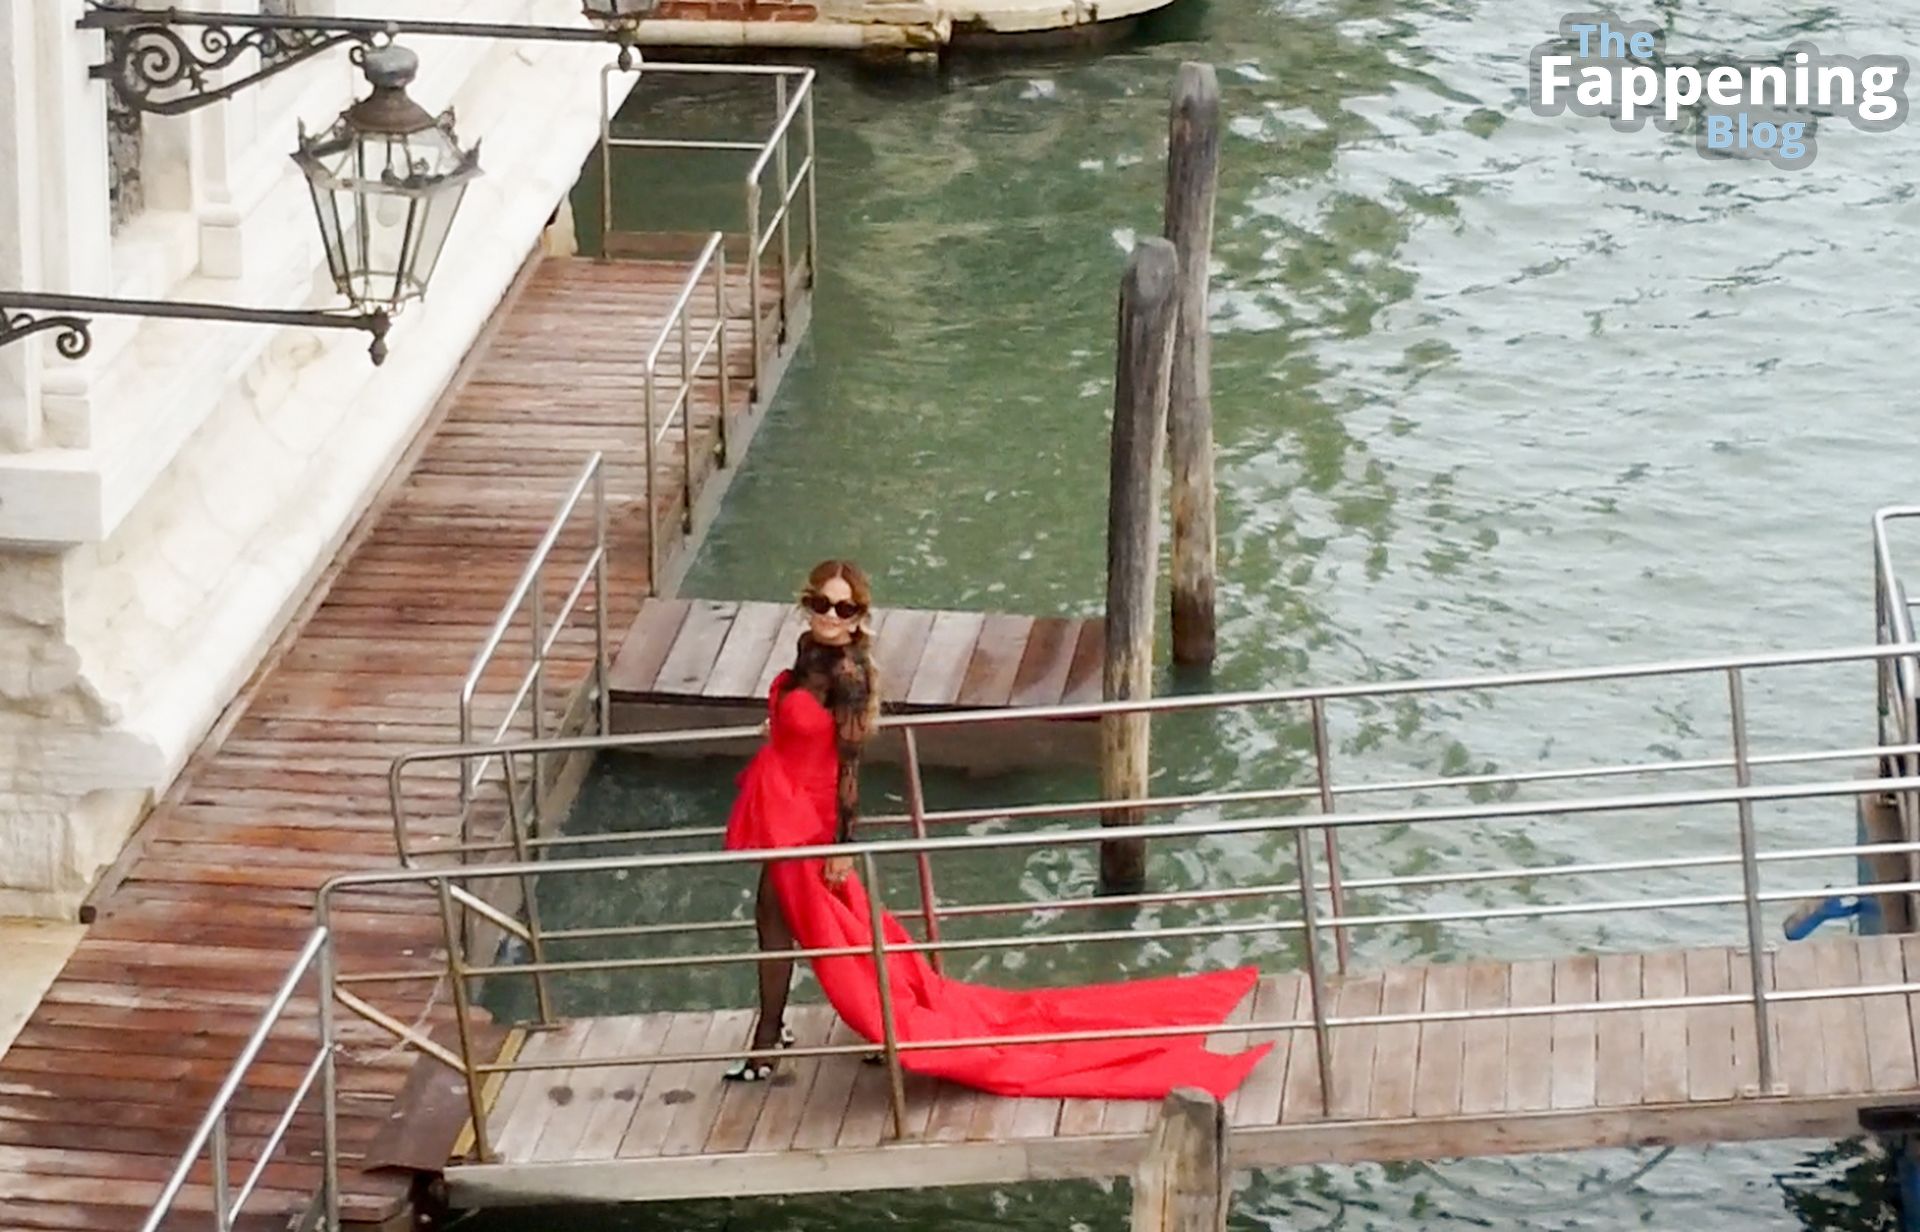 Rita Ora Flaunts Her Boobs and a Long Moschino Red Dress Heading to a Boat in Venice (42 Photos)